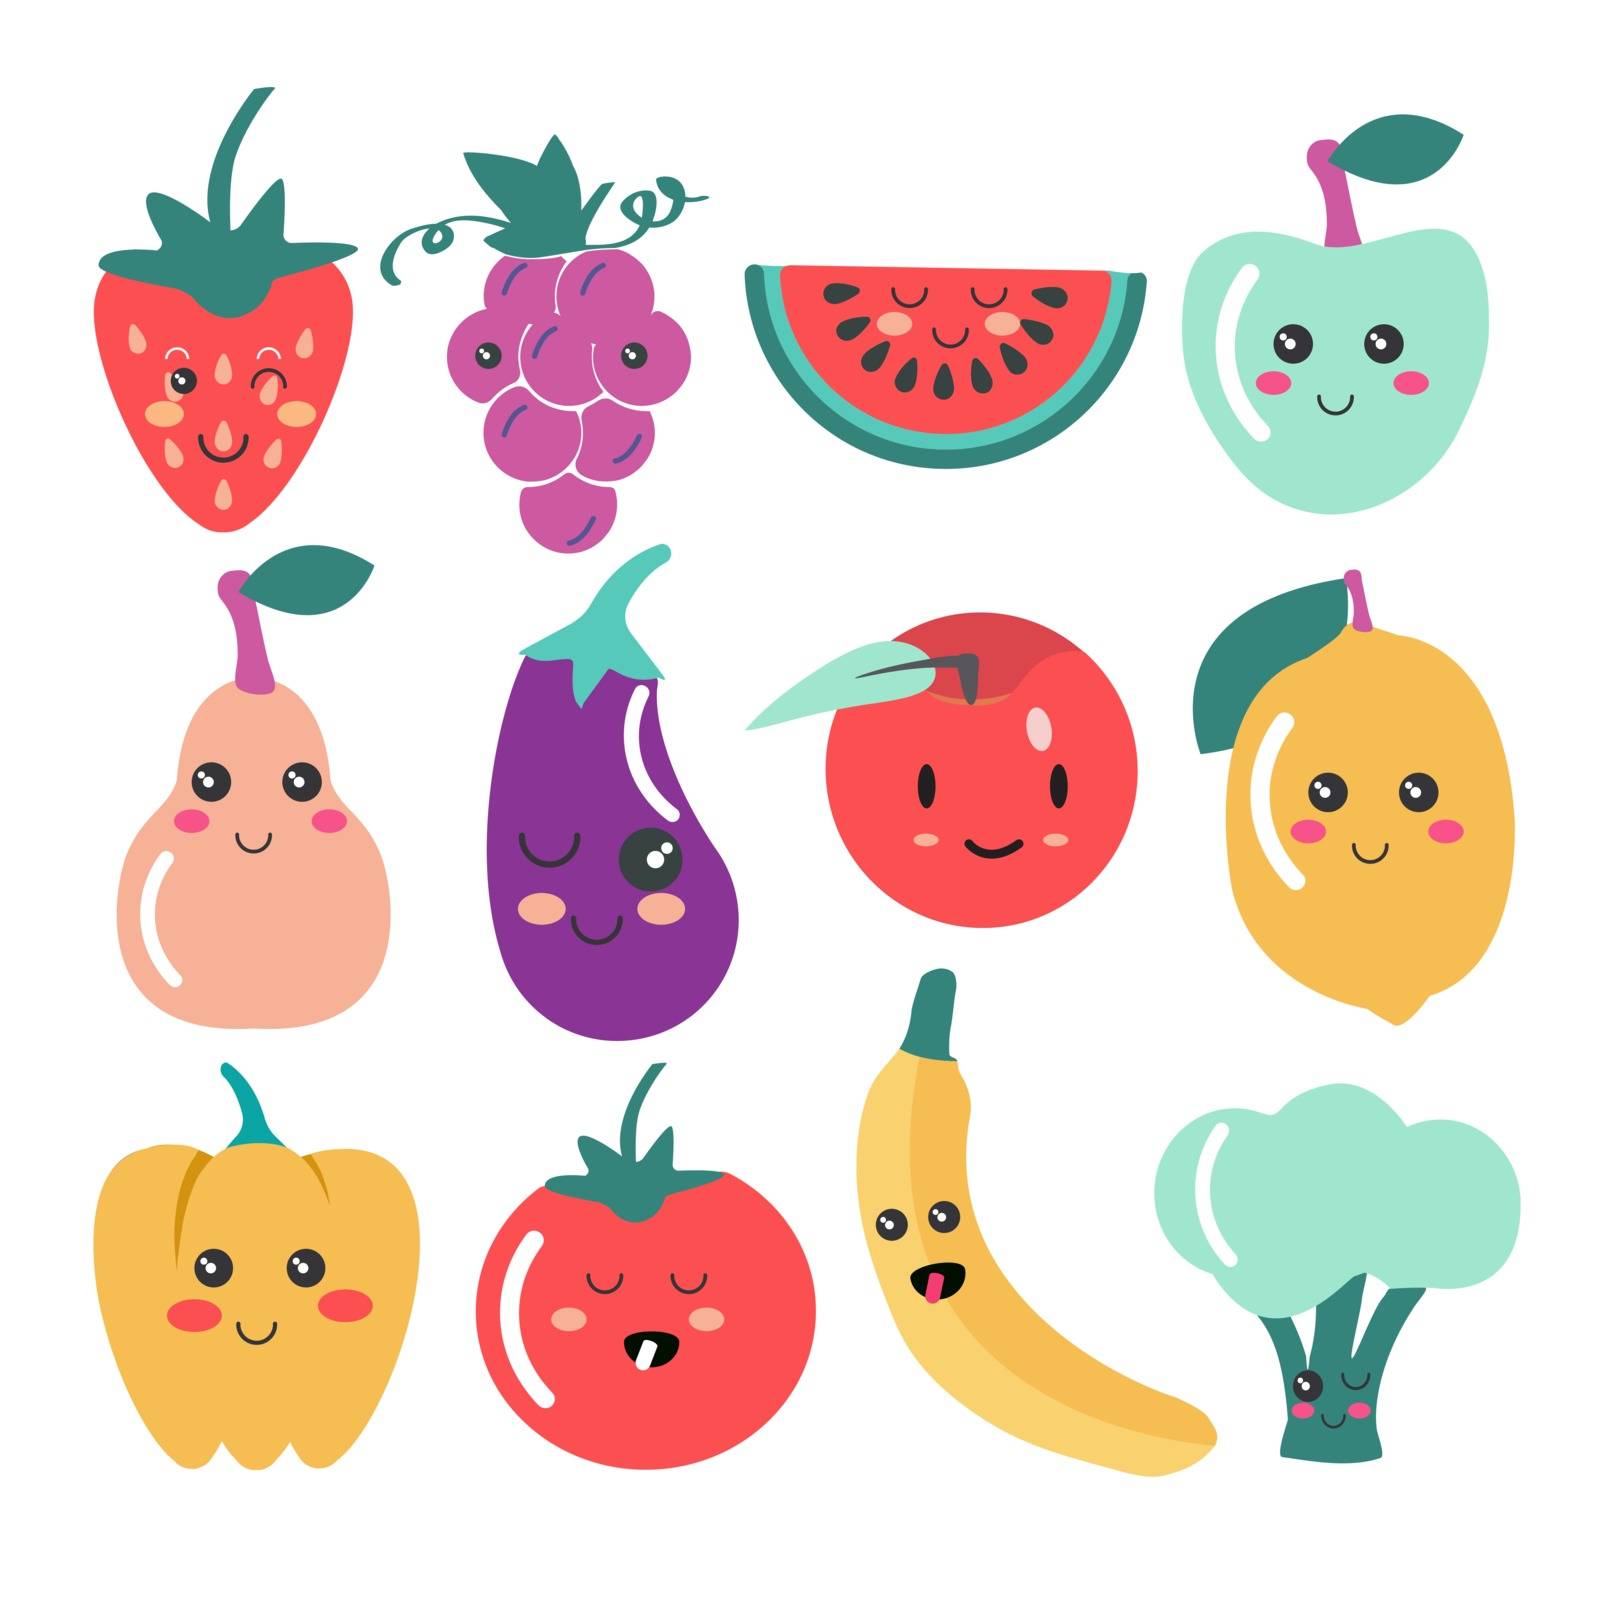 Cute Kawaii fruit and vegetable icons. Vector set of cute Fruit and veg illustration. 